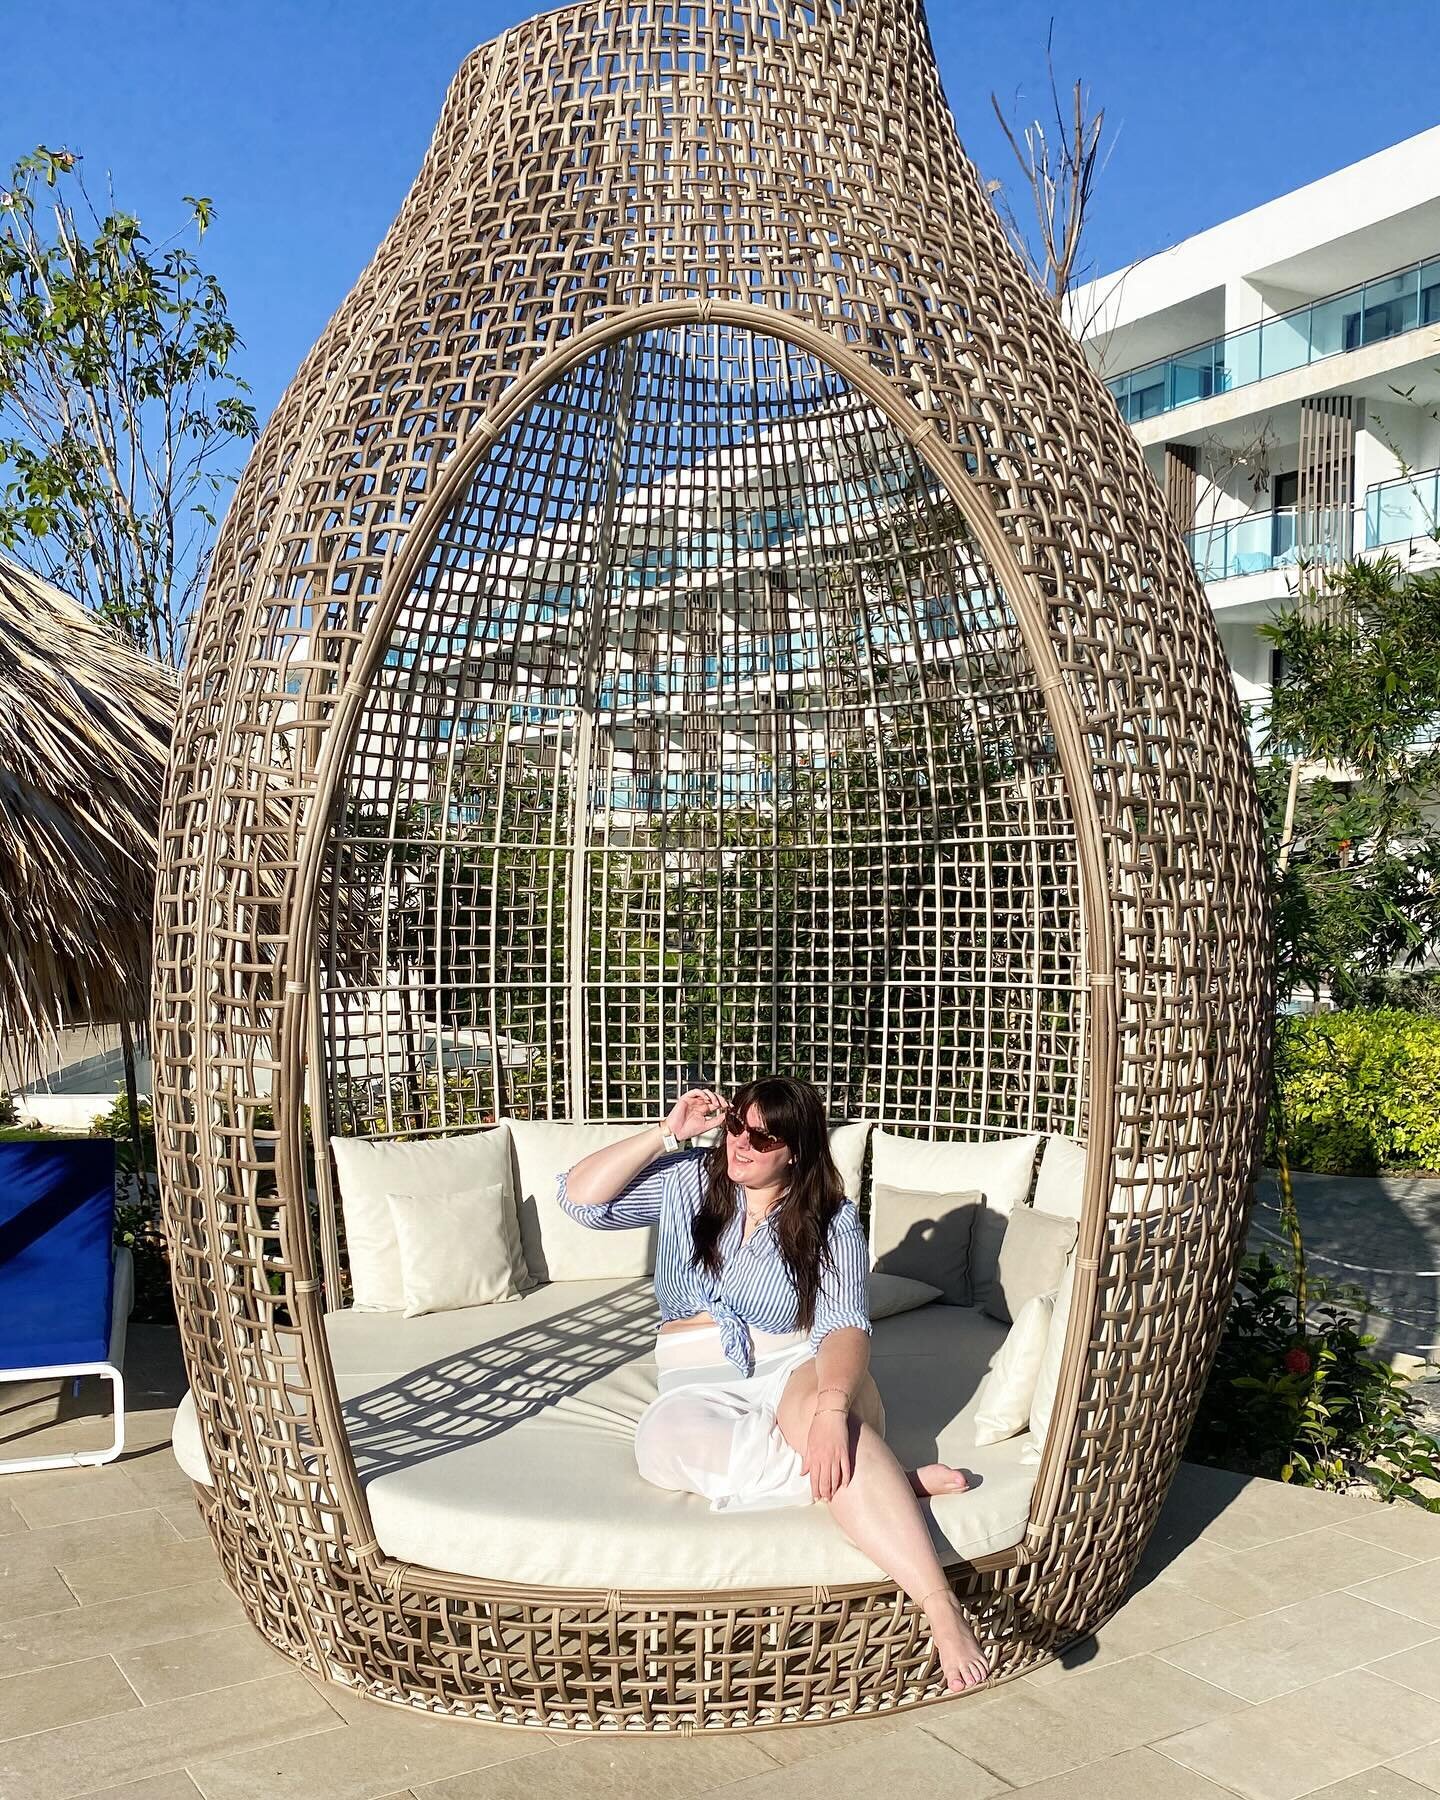 🌊 Punta Cana, DR 2024 🌅

A little photo dump from this past week in the beautiful Dominican Republic! 

#winnipegblogger #lifestyleblogger #travelblogger #resortstyle #wintergetaway